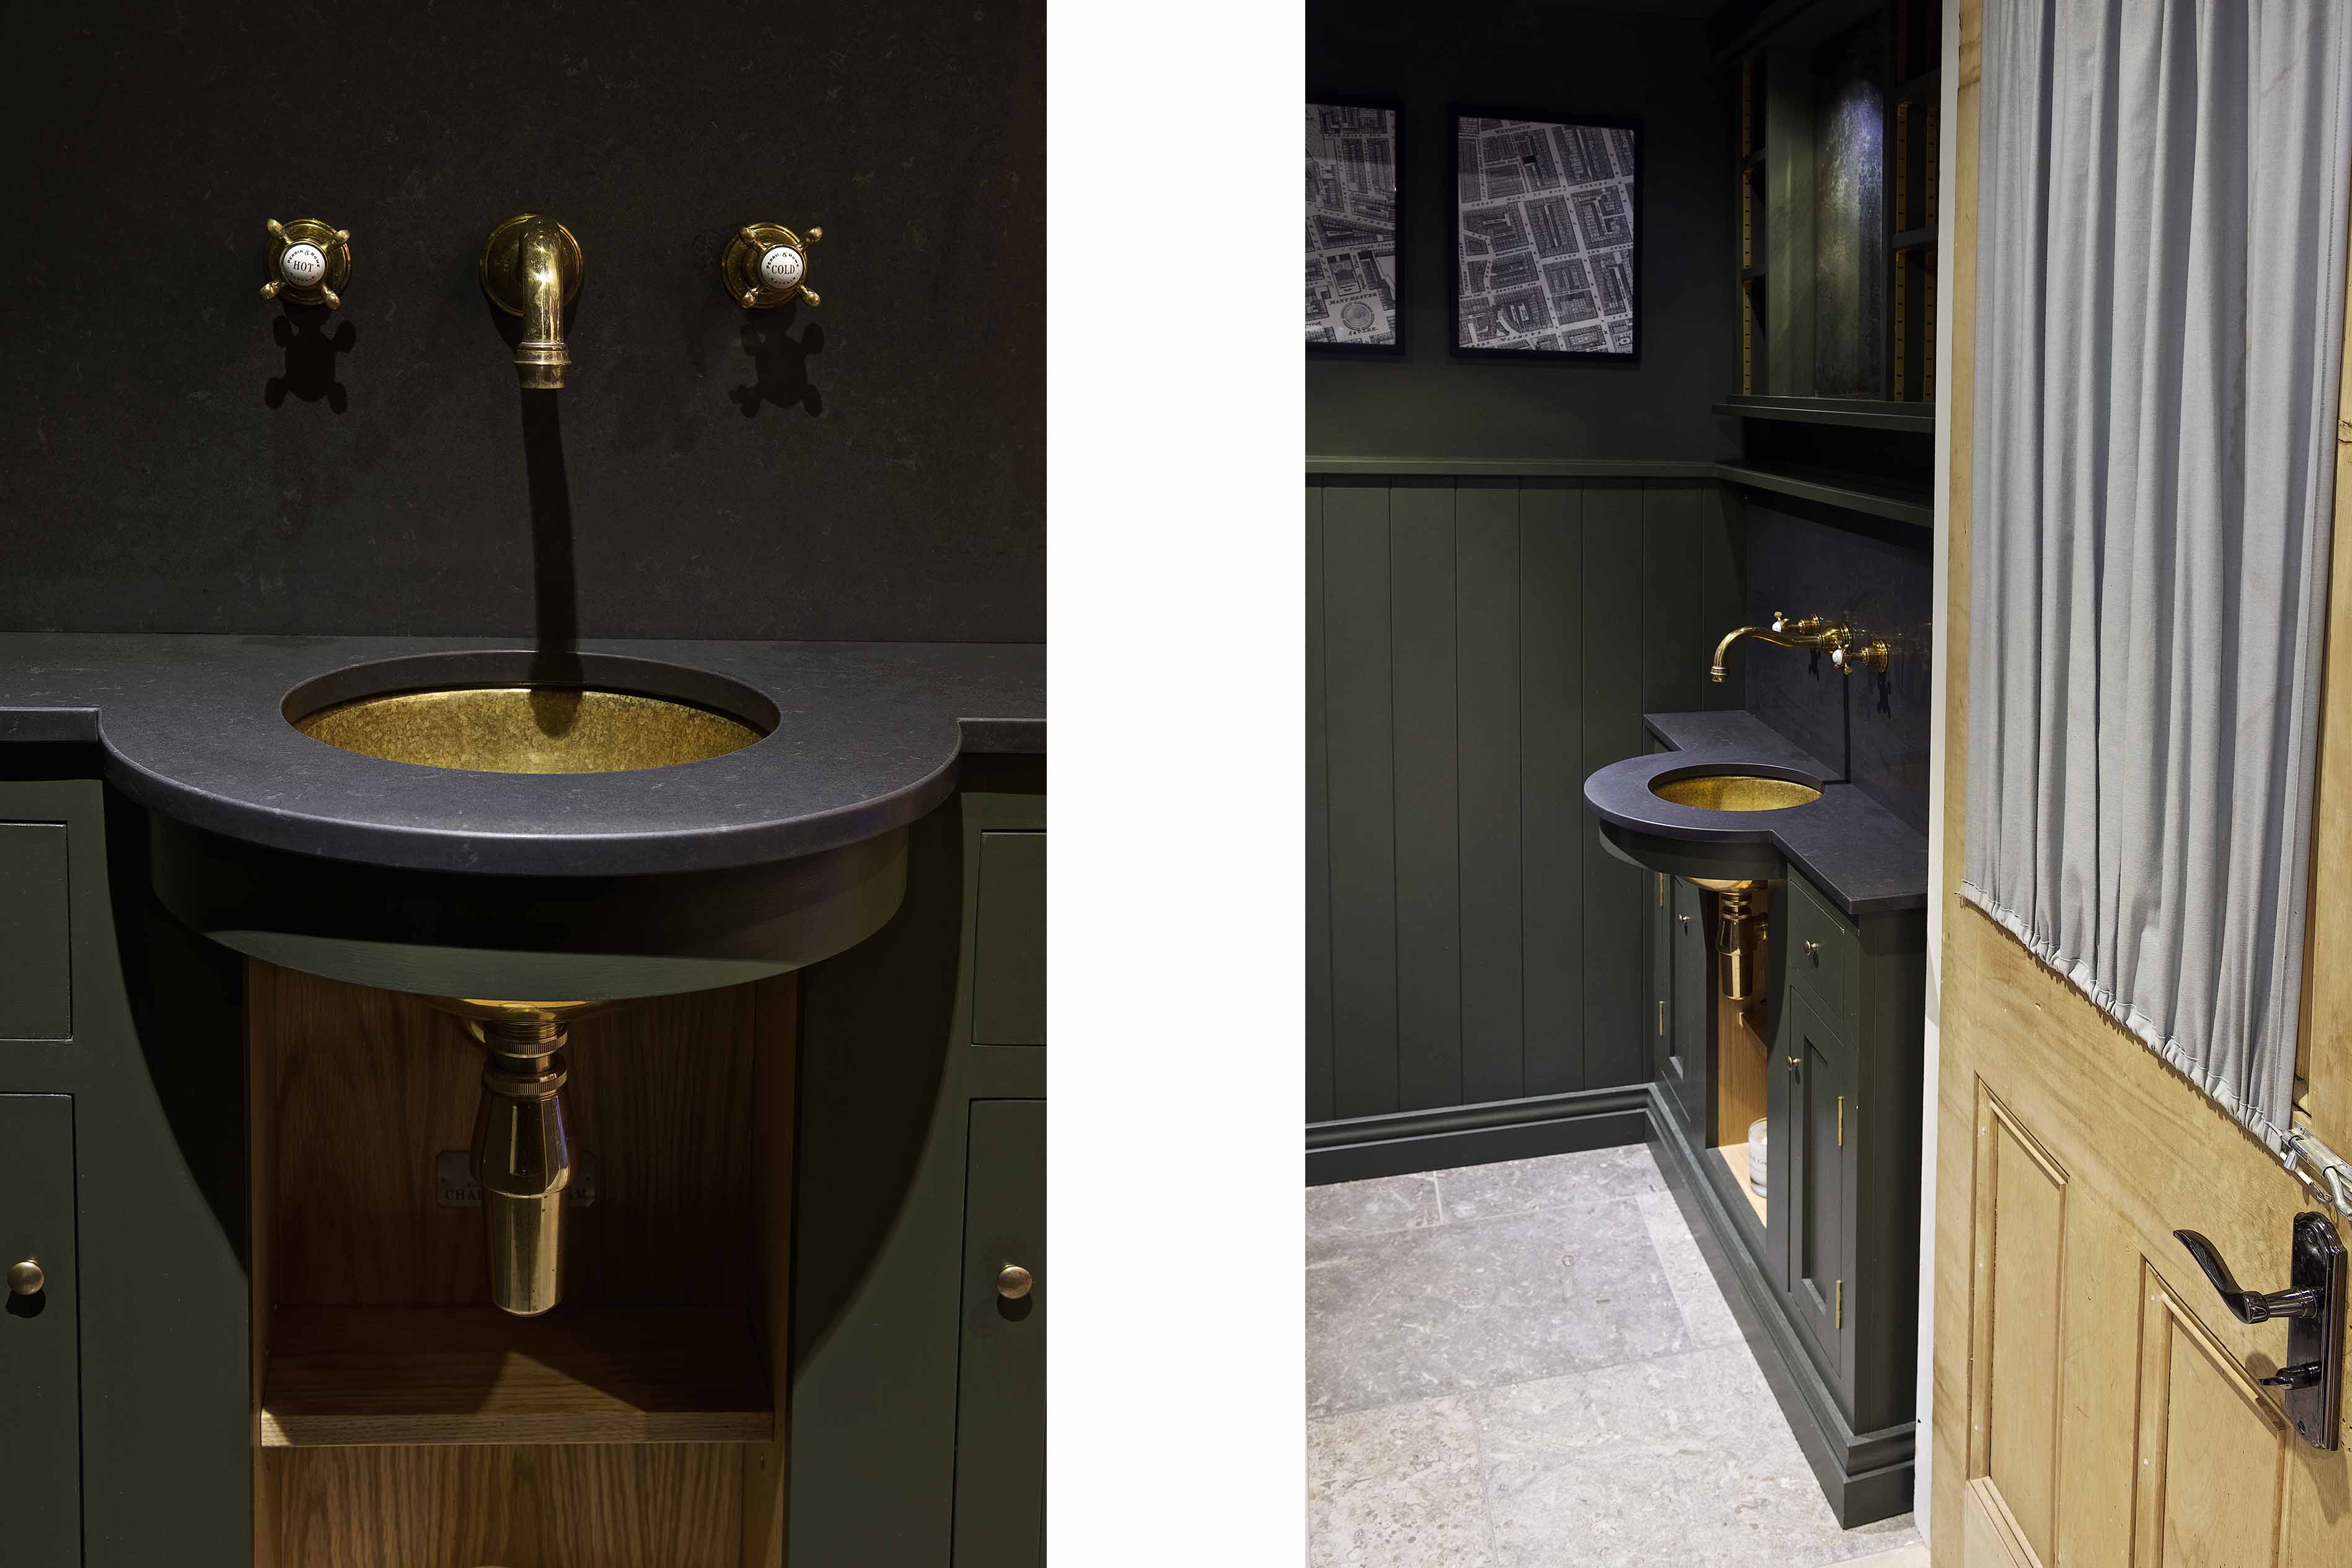 Bespoke bathroom cabinets brass sink taps perrin and rowe armac martin marble quartz granite tops farrow and ball mylands near Guildford Surrey